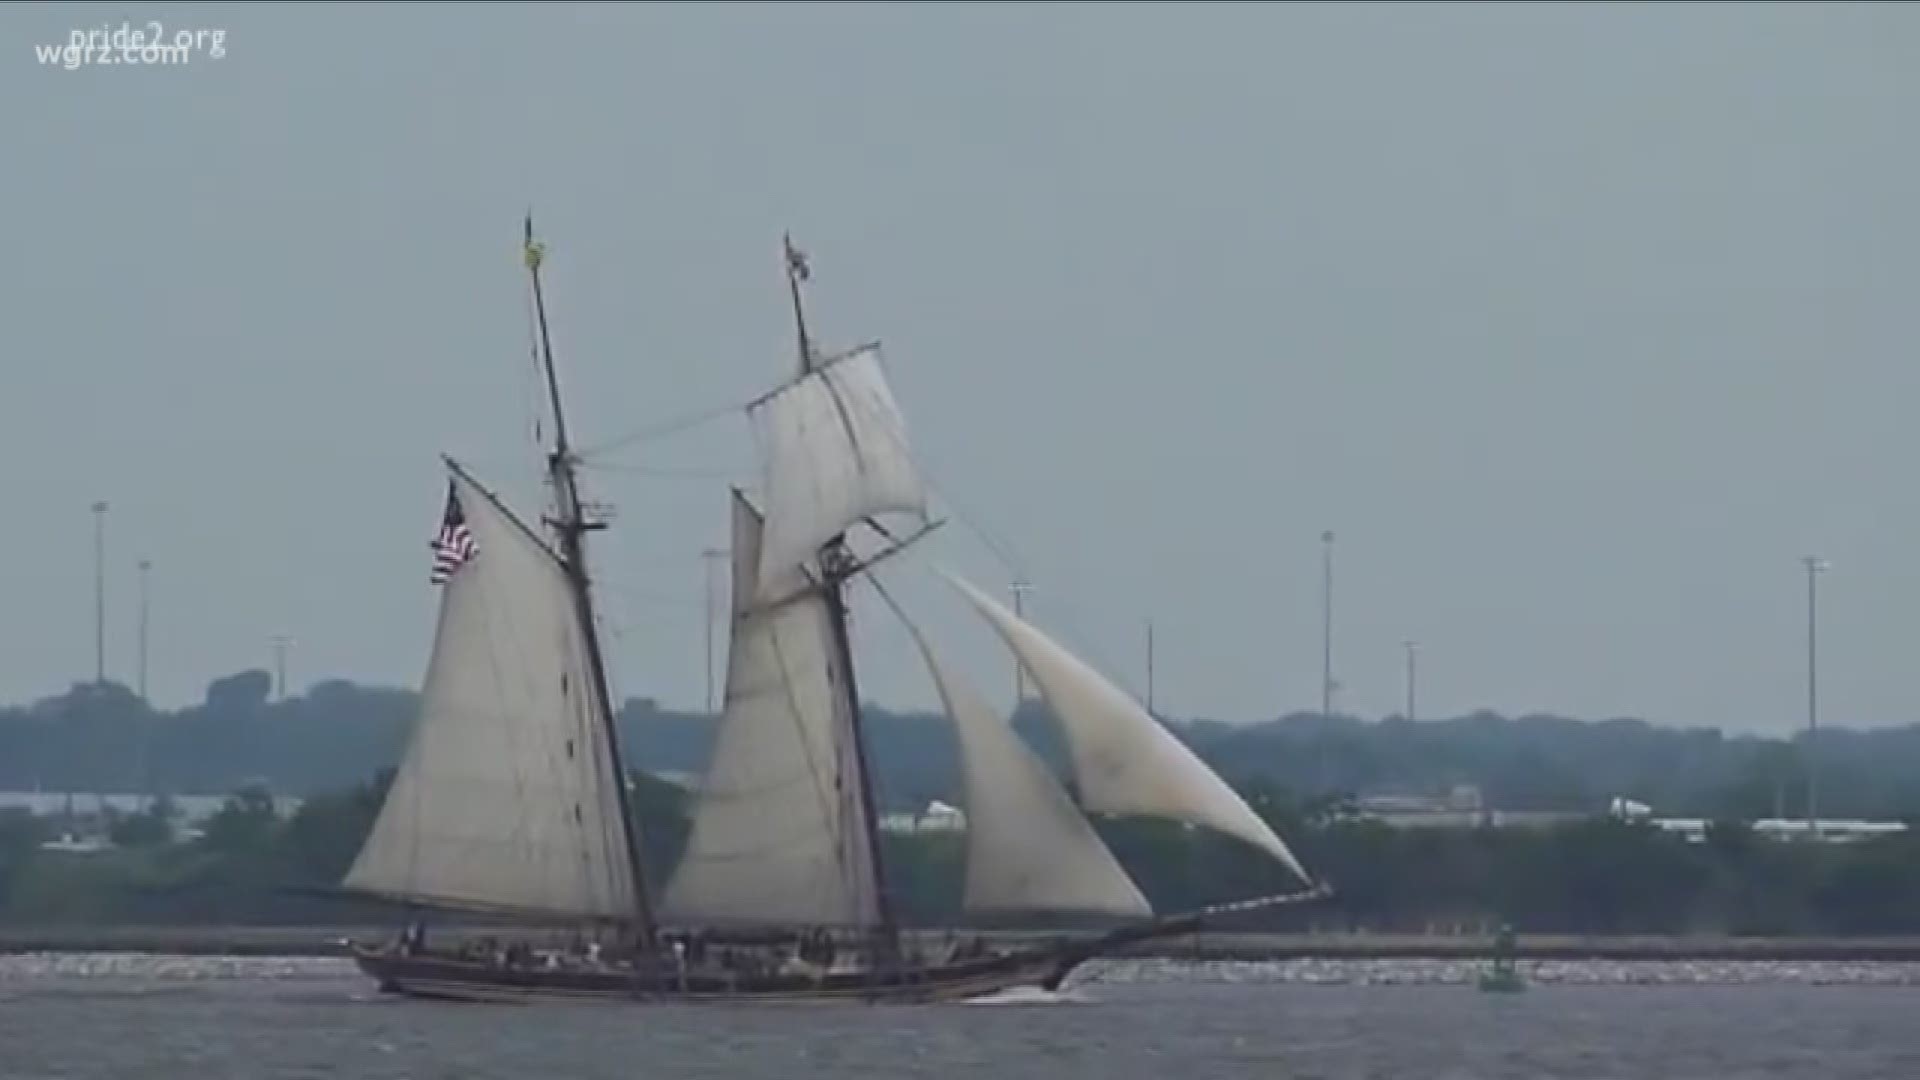 Basil Port of Call: Buffalo Will Bring Twelve Historic Tall Ships to Canalside and Erie Basin Marina for Fourth of July